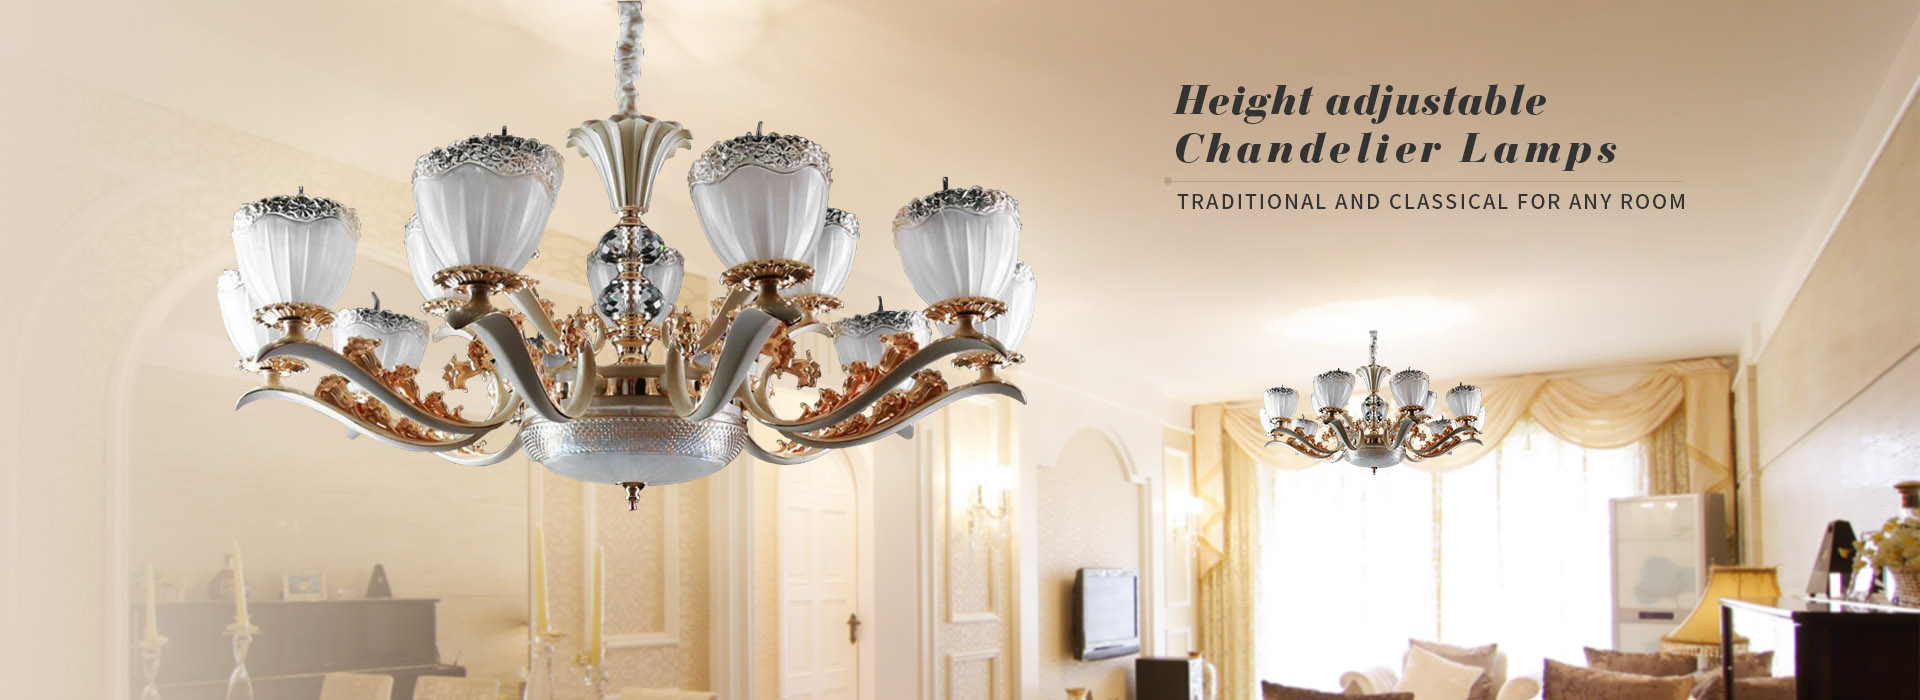 Height adjustable Chandelier Lamps, Traditional and classical for any room